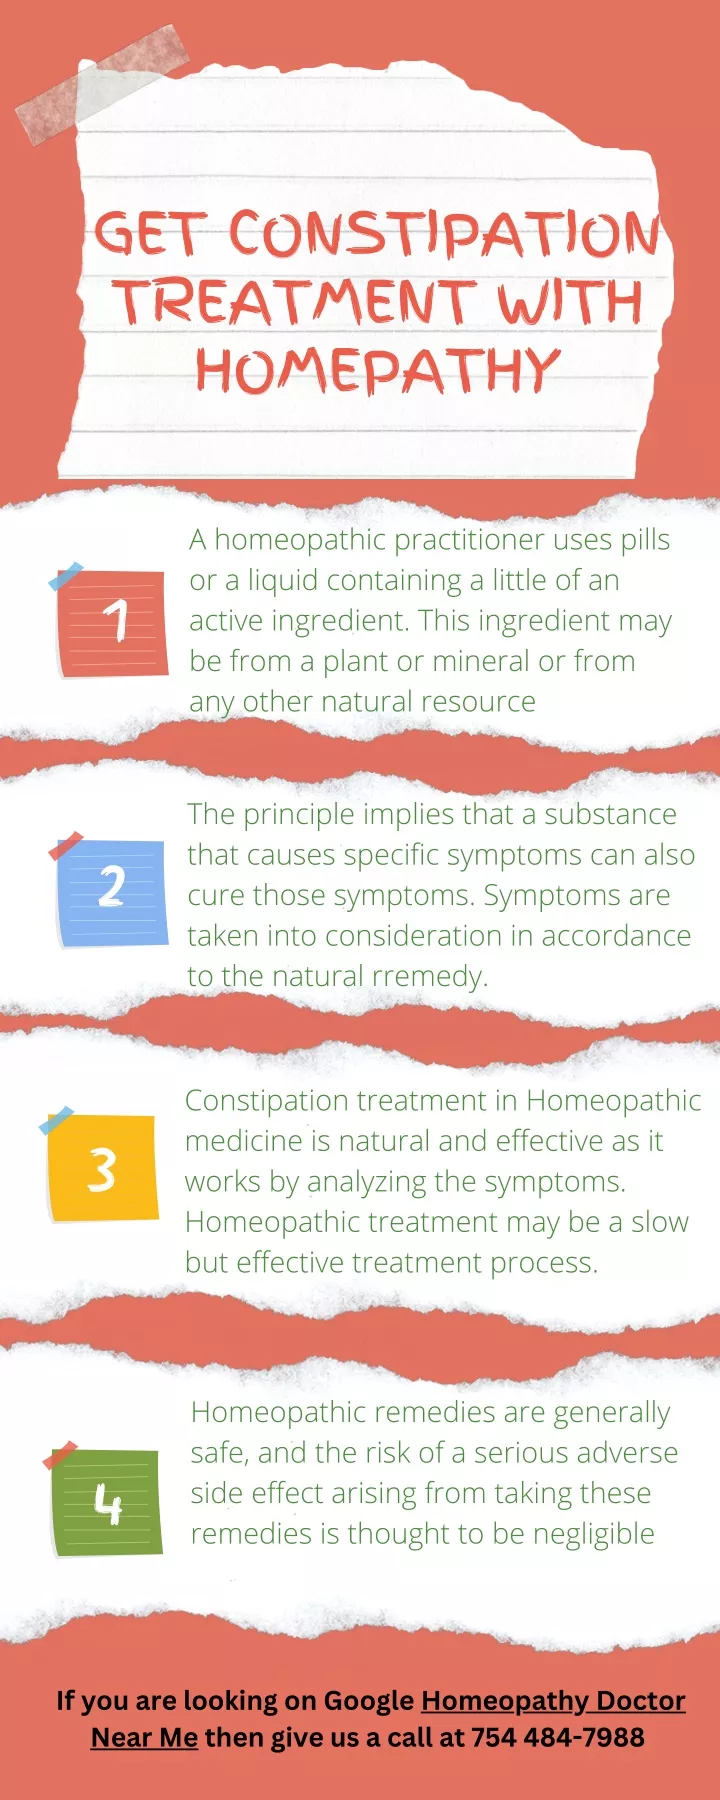 get constipation treatment with homepathy